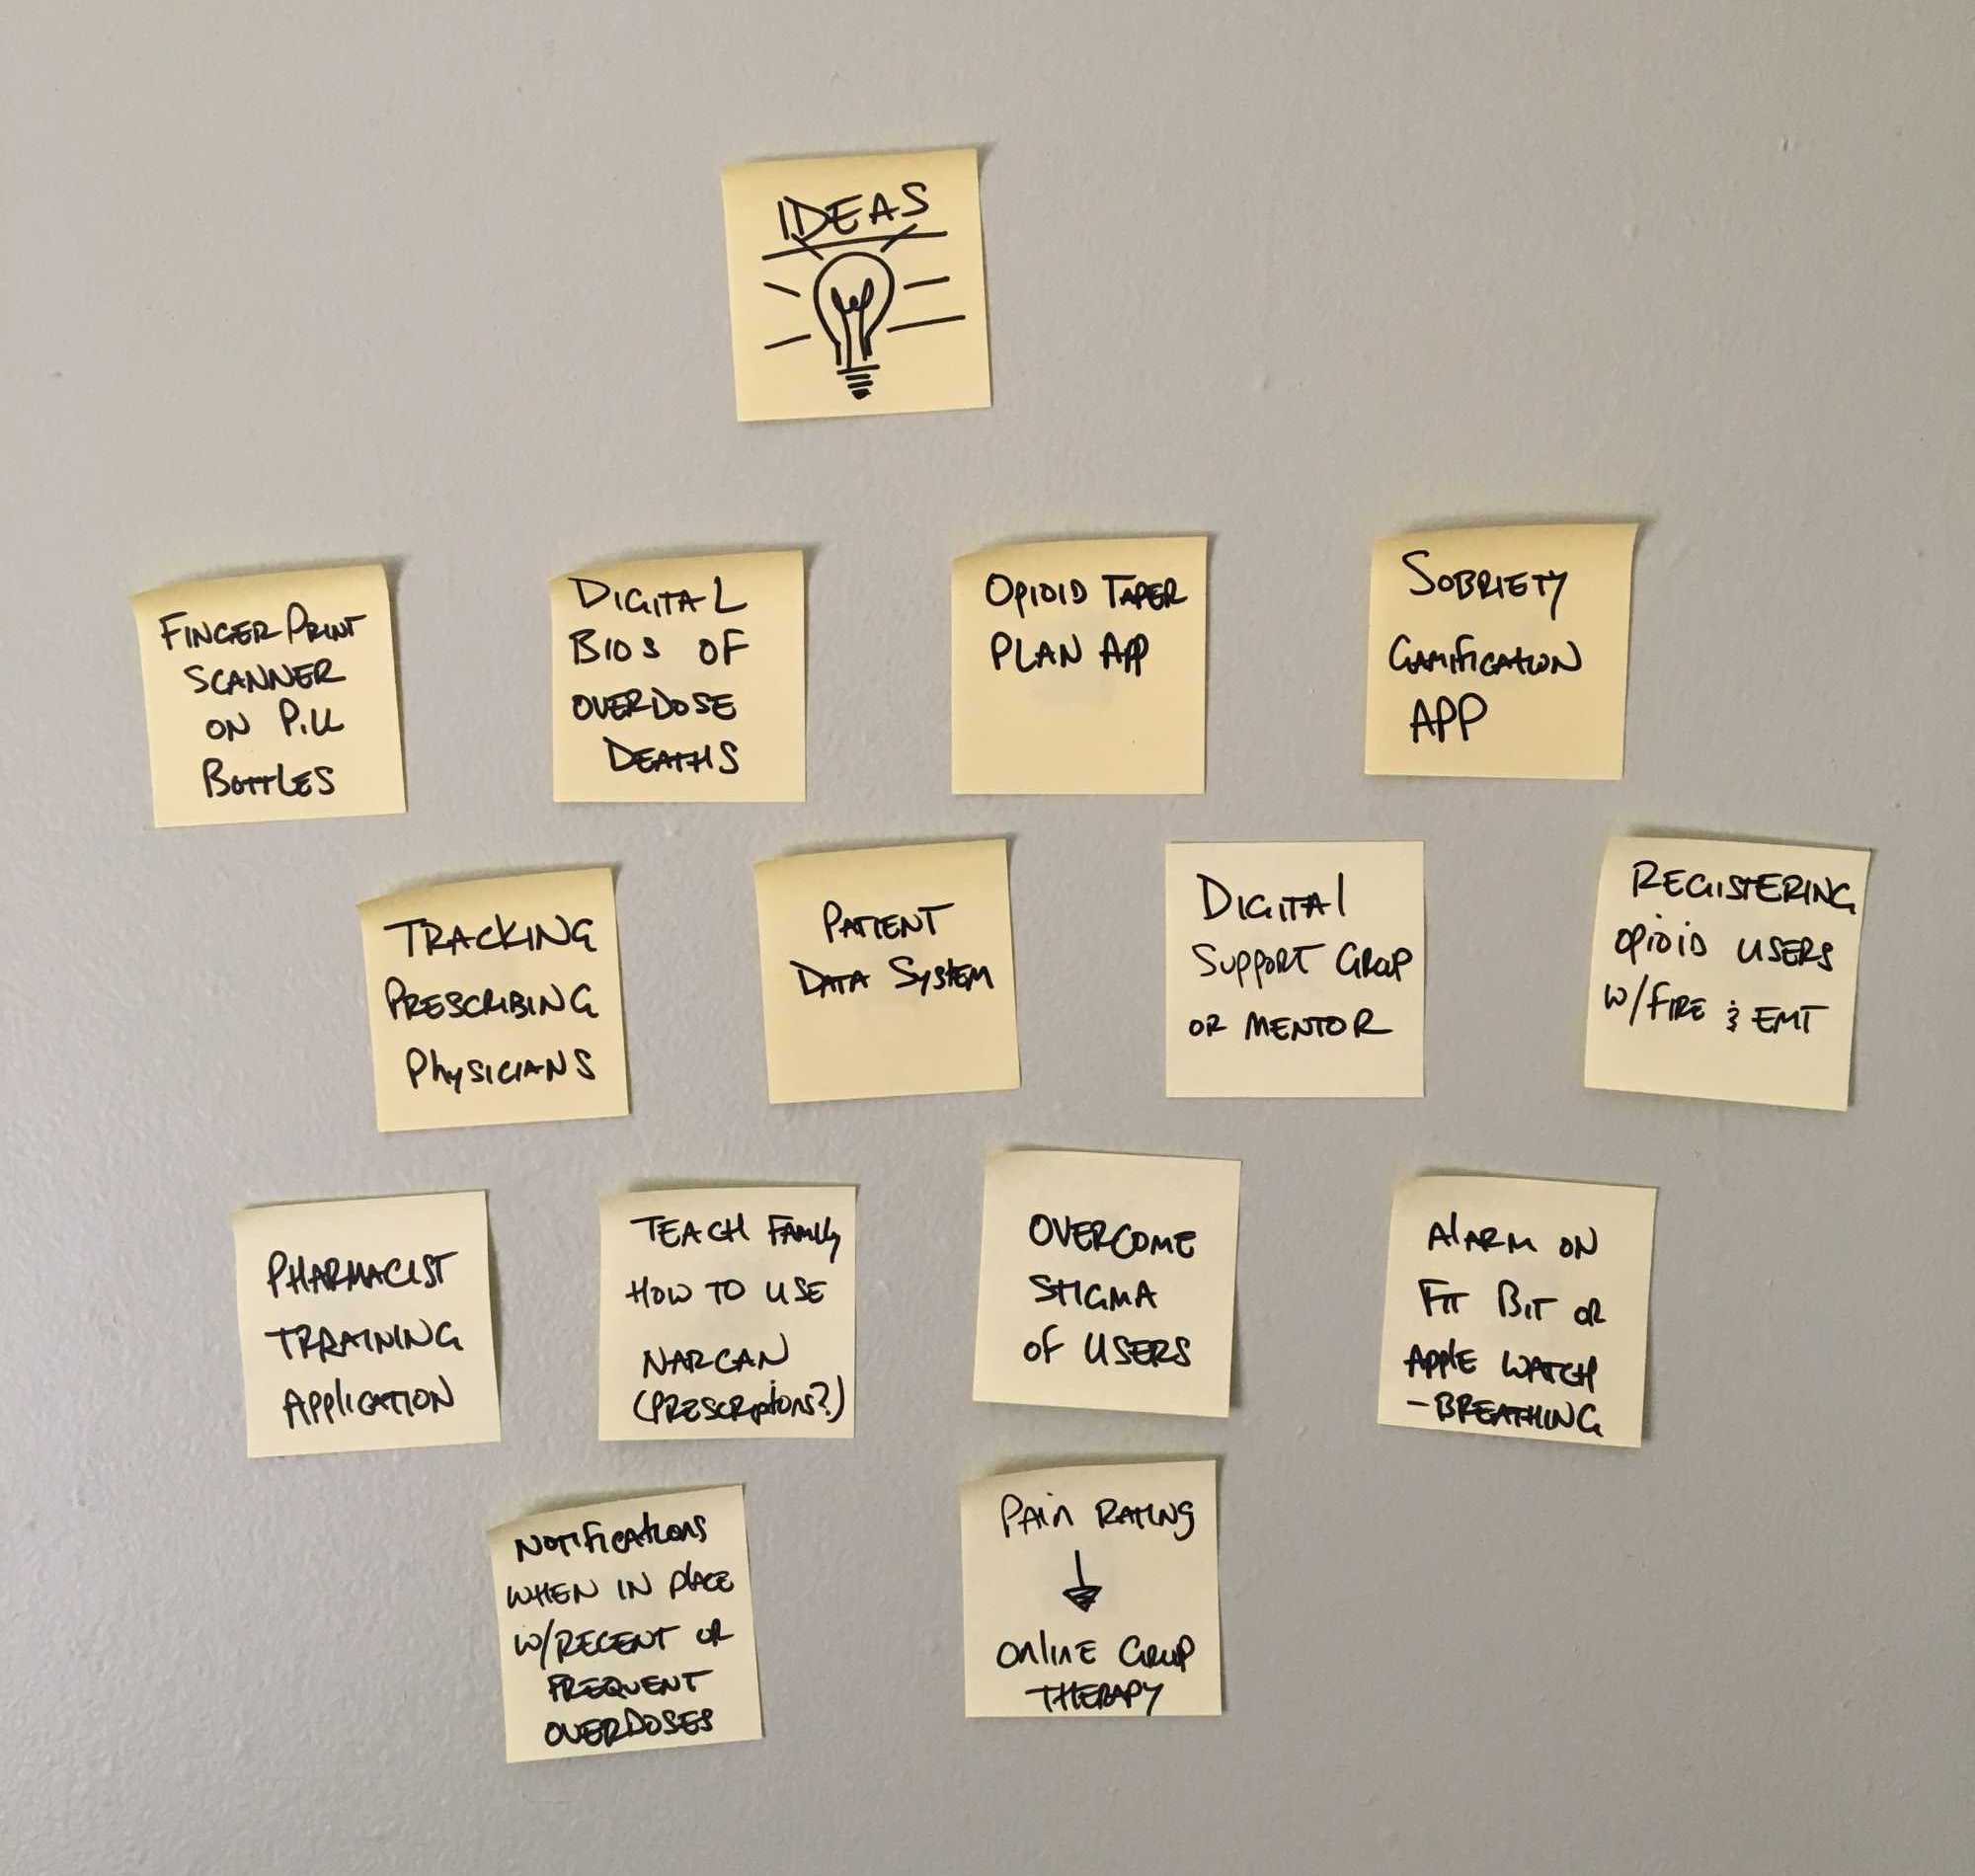 sticky notes with ideas written on them posted on a wall